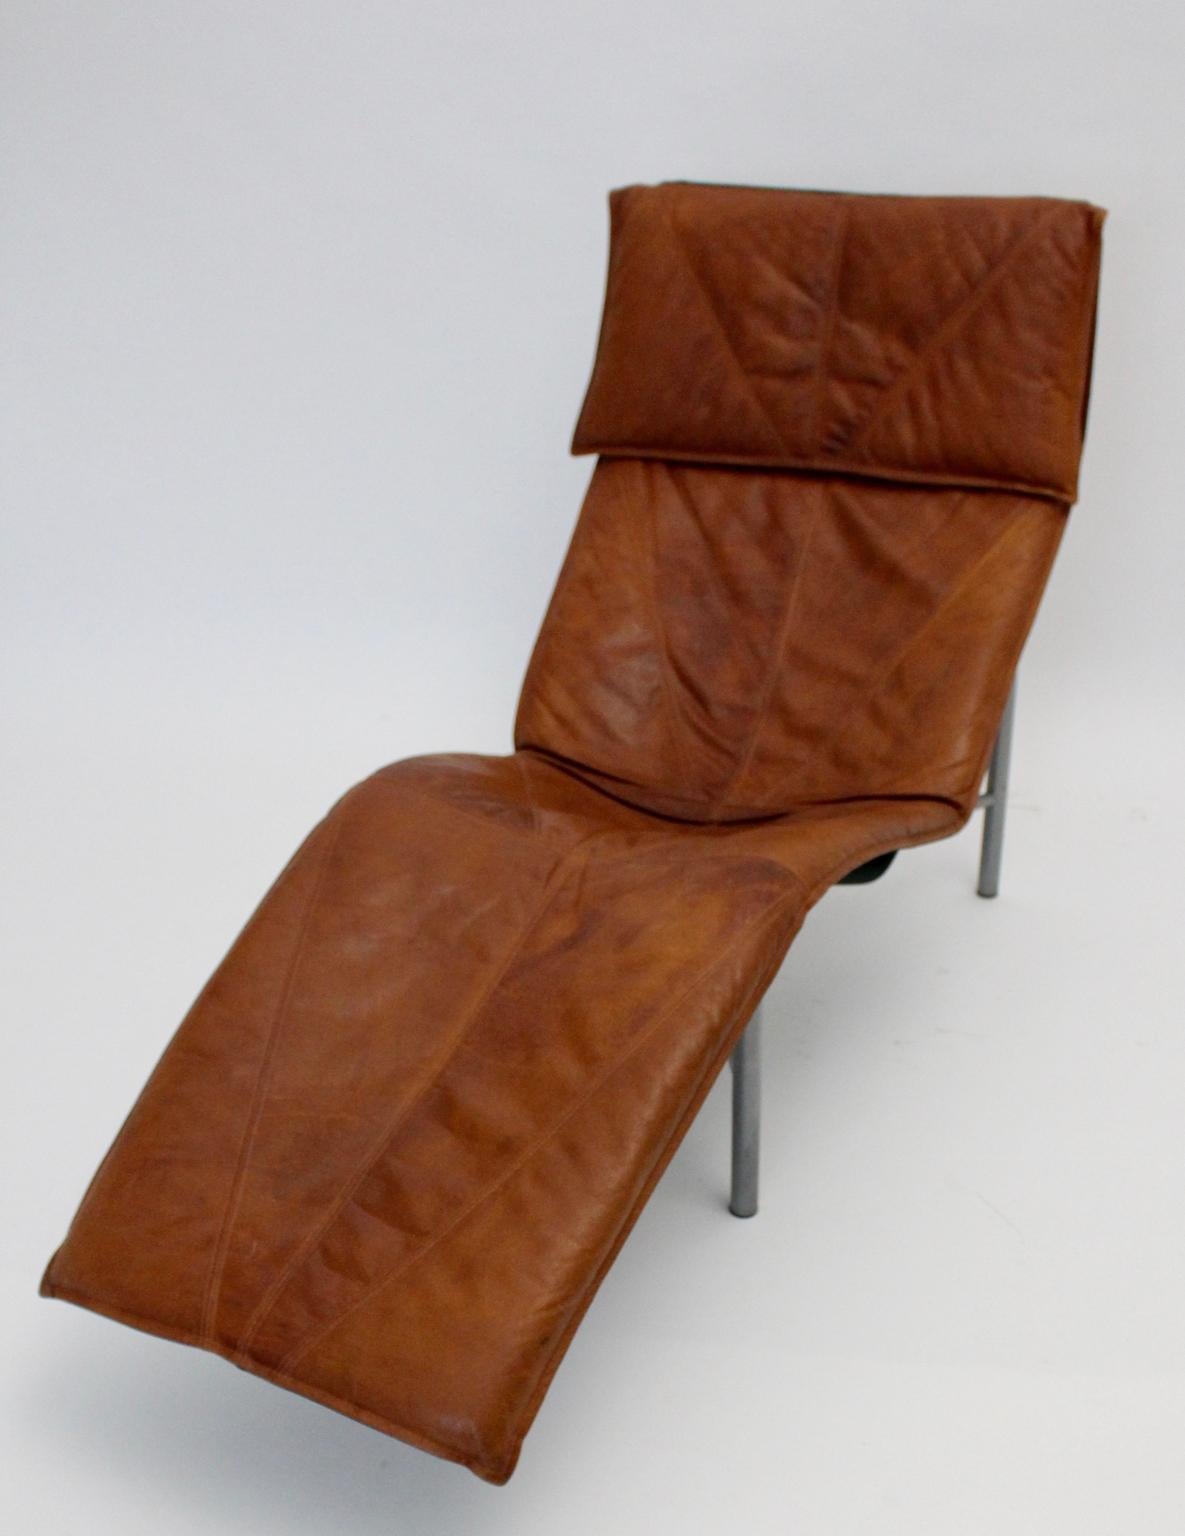 Late 20th Century Vintage Cognac Leather Chaise Longue by Tord Bjorklund Sweden, 1970 For Sale